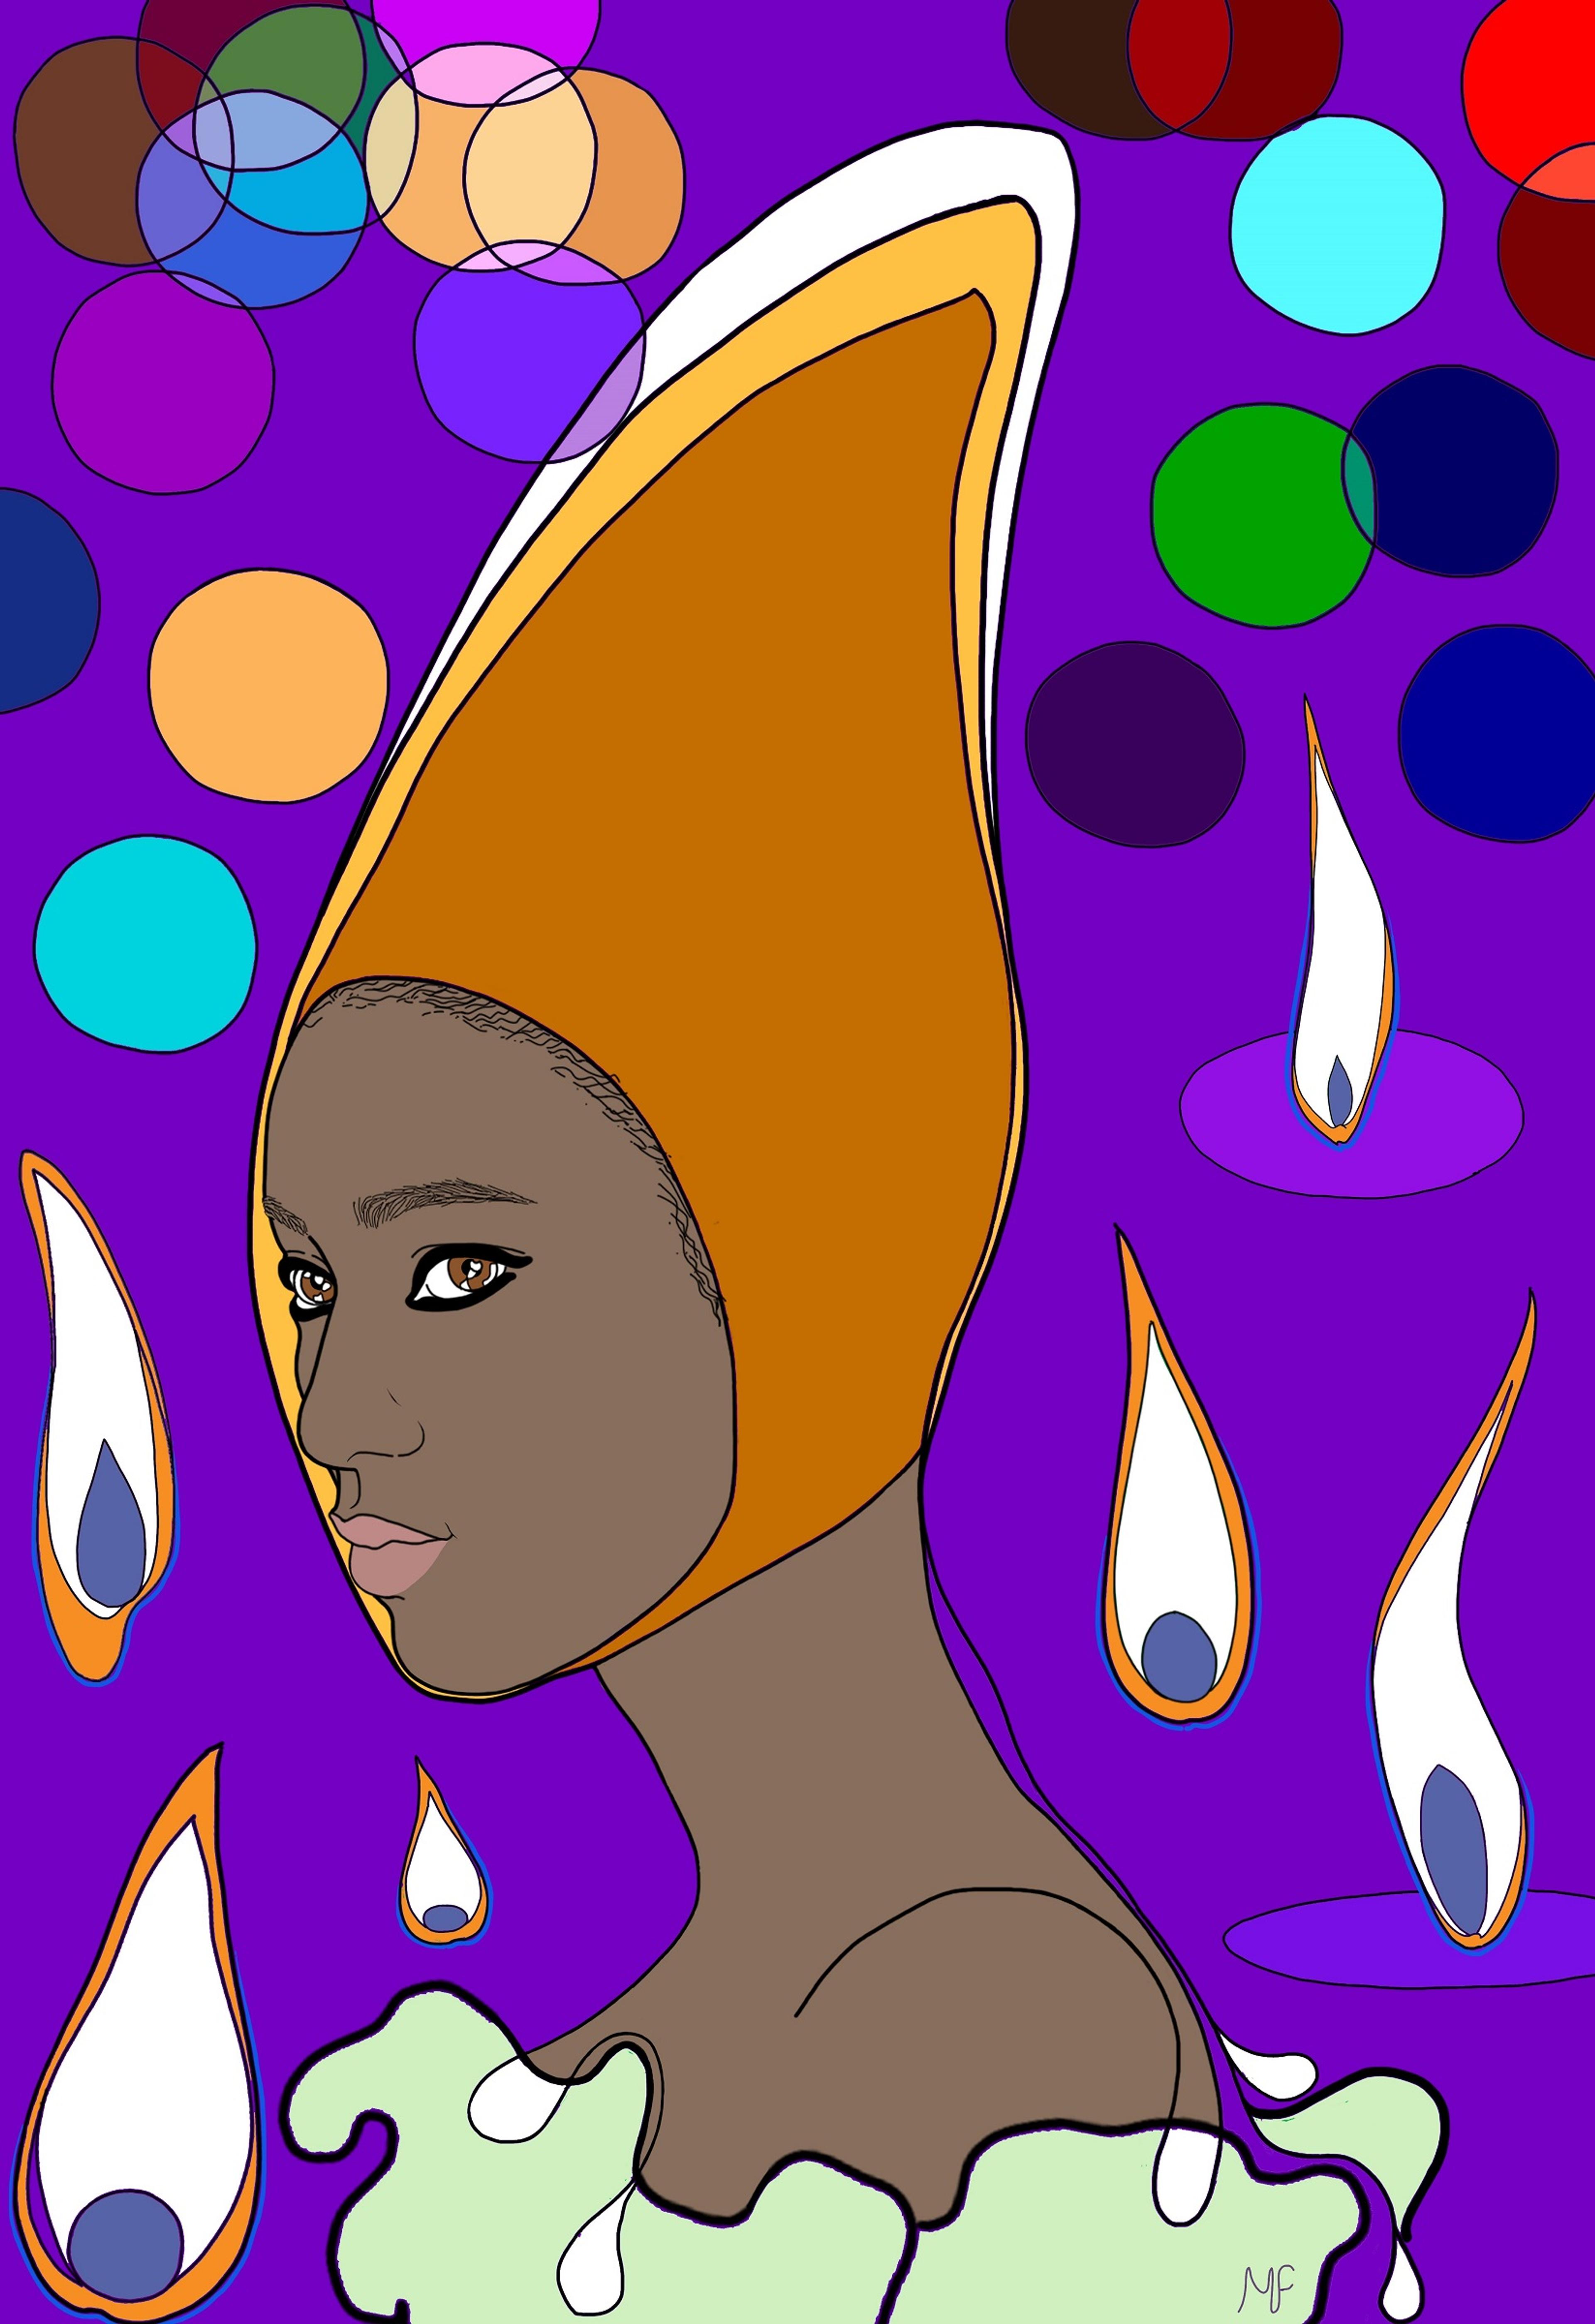 Illustration of a person wearing a flame-like hat, surrounded by lit matches